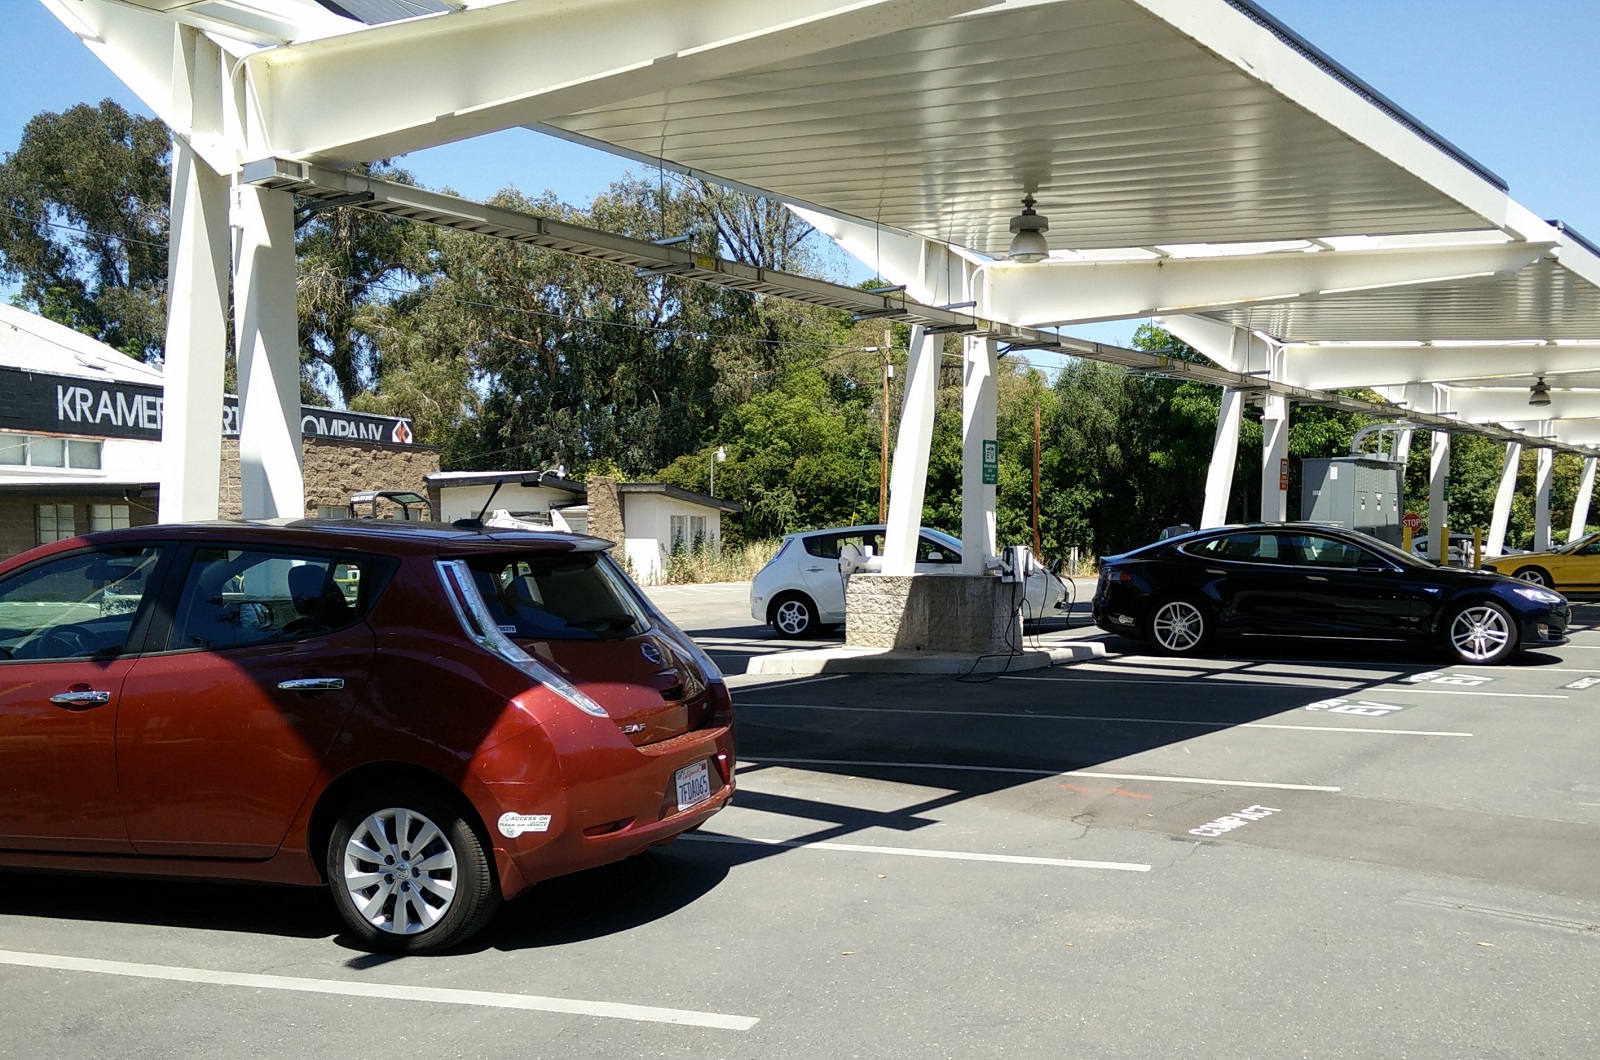 Price Of ElectricCar DC Fast Charging Varies Sacramento A Test Case